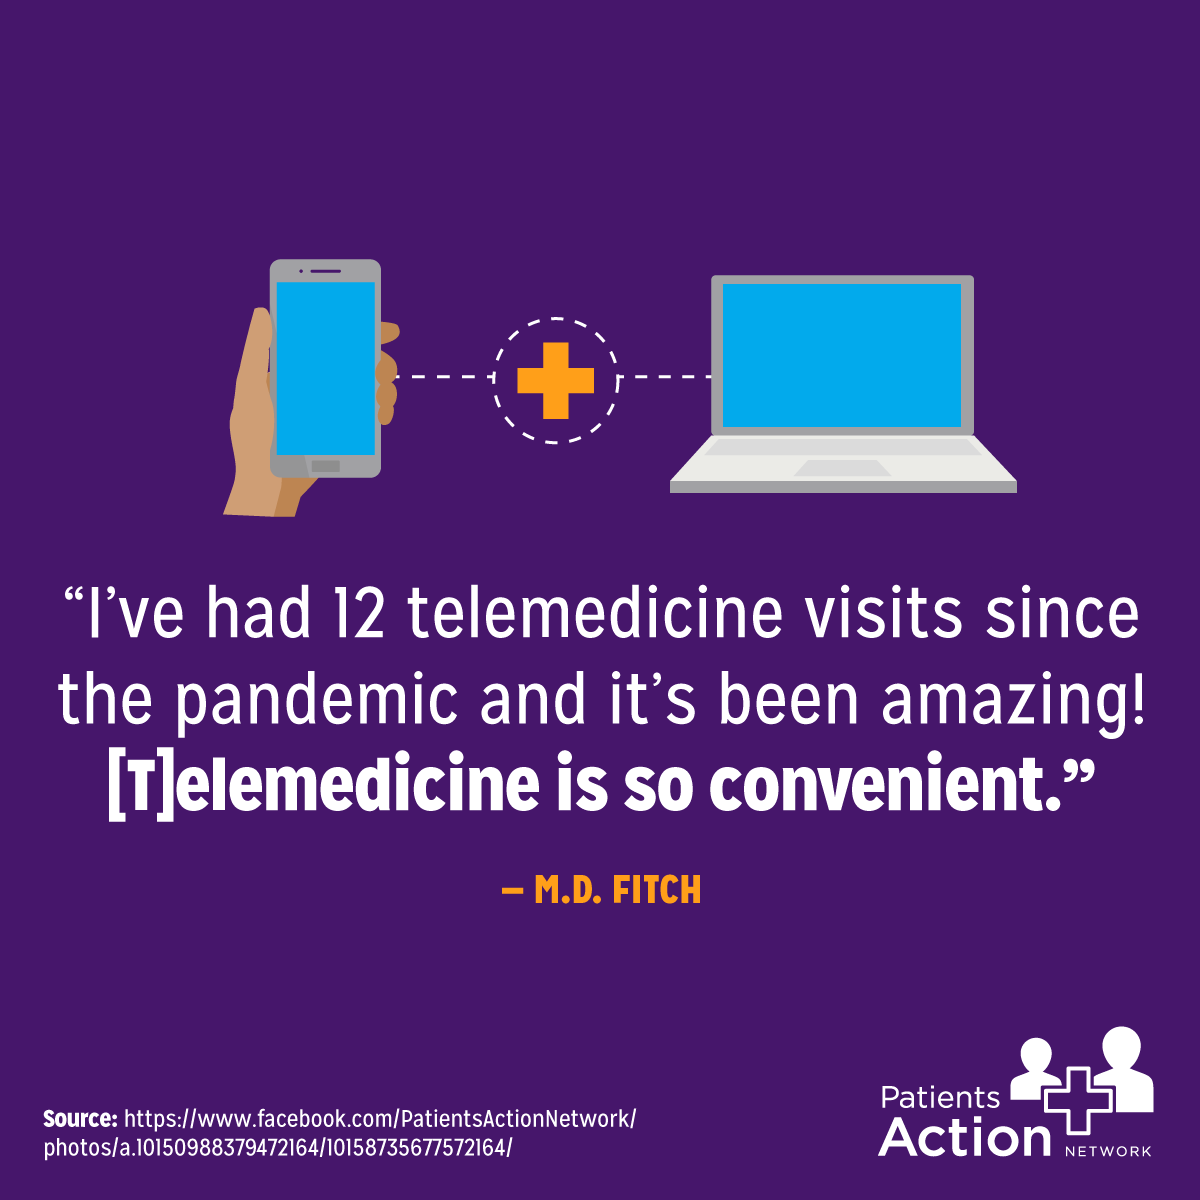 I've had 12 telemedicine visits since the pandemic and it's been amazing! [T]elemedicine is so convenient.